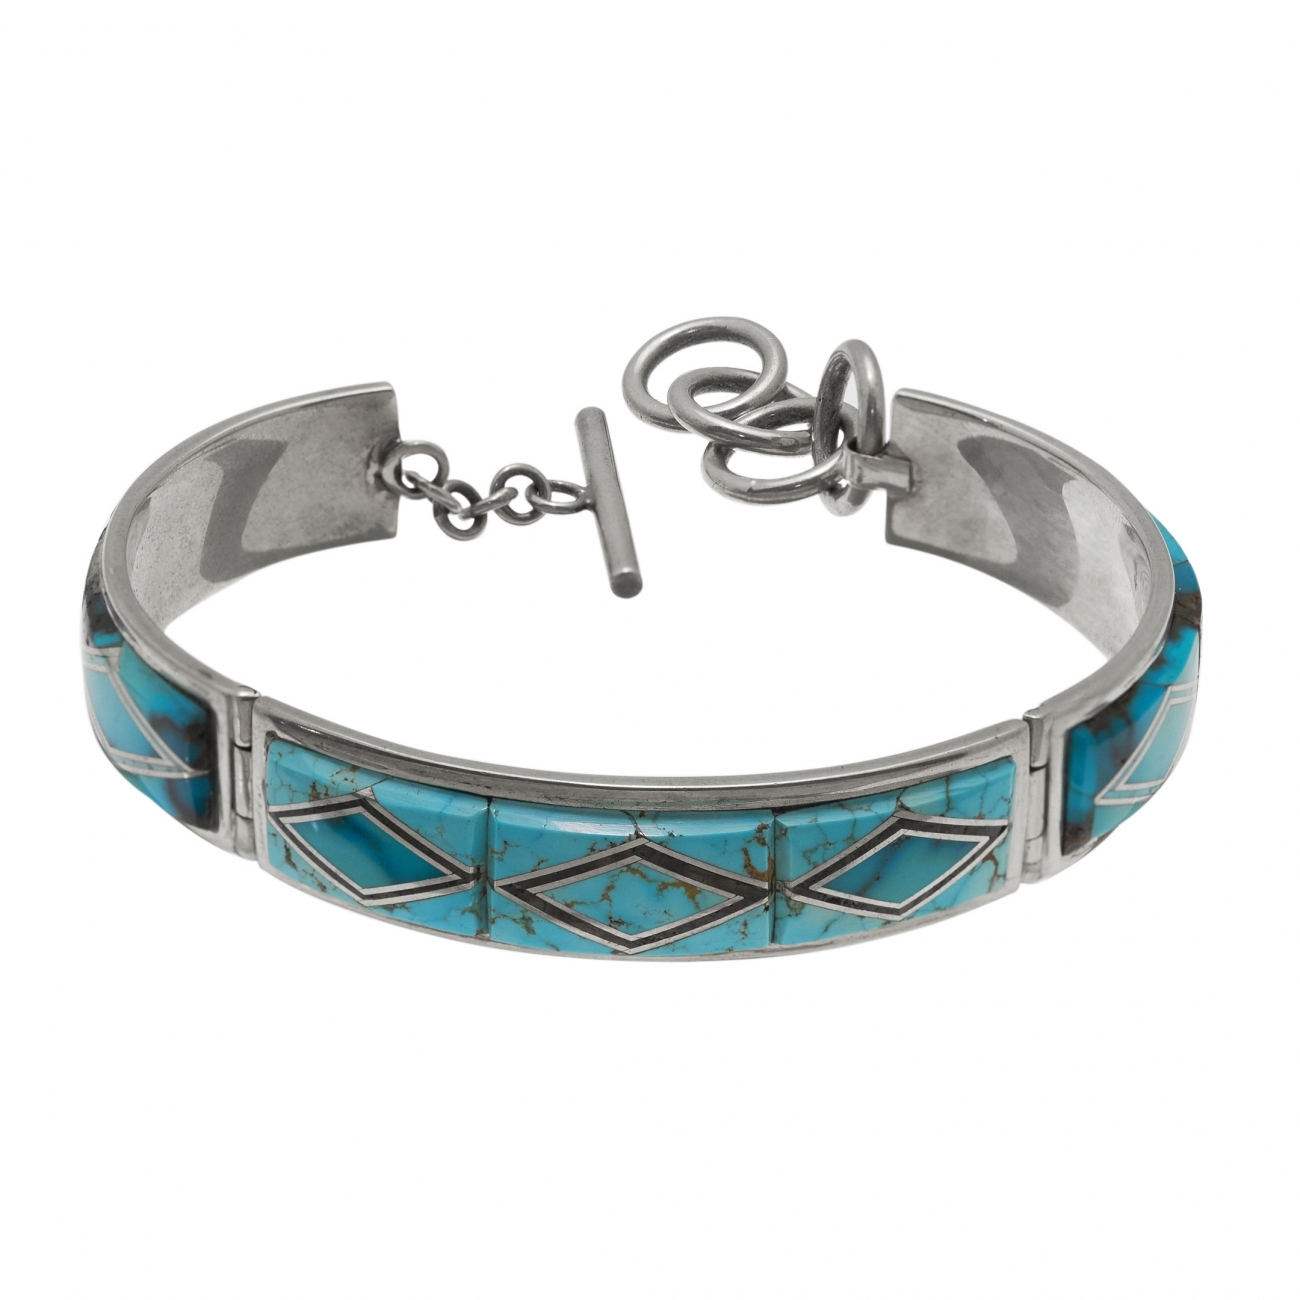 Stunning bracelet MIS24 for women in turquoise and silver - Harpo Paris